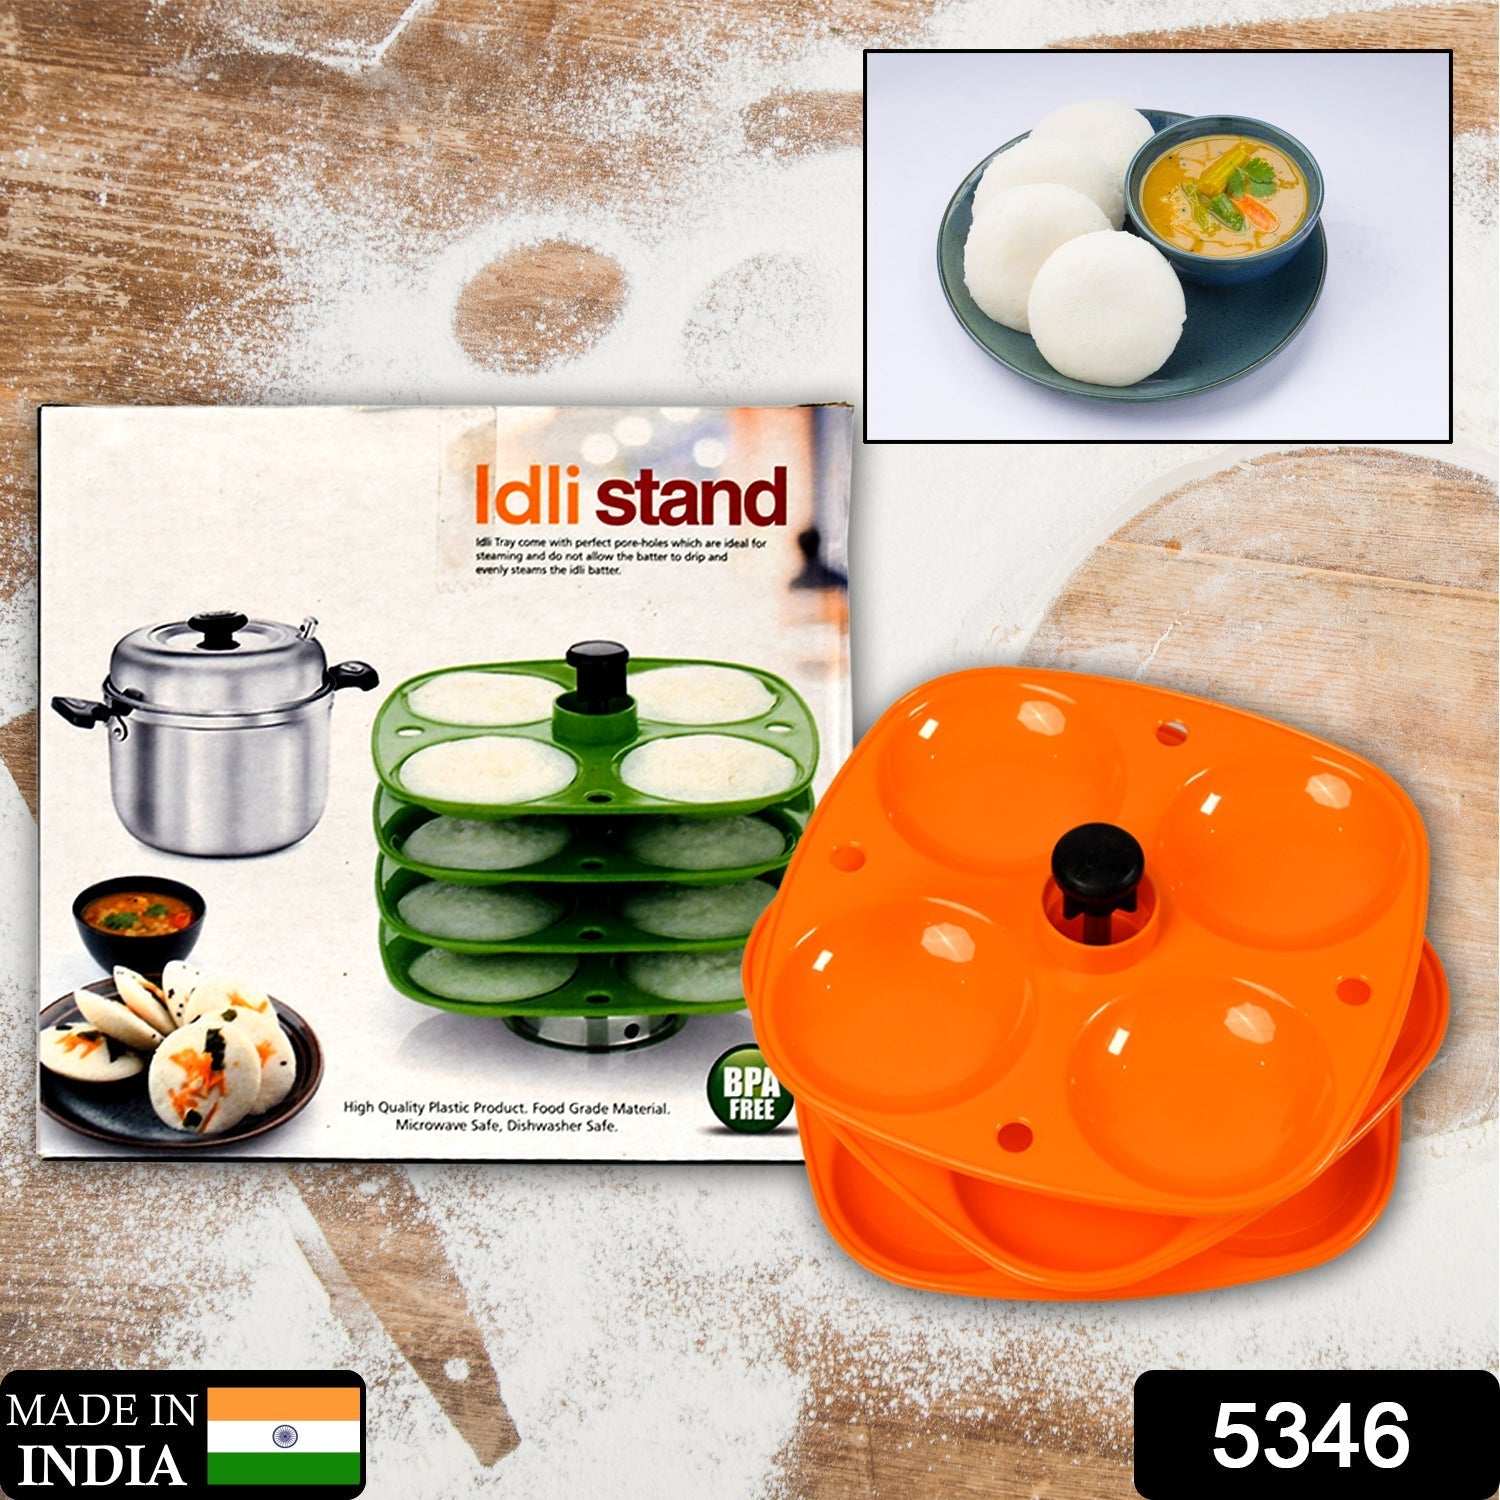 5346 3 Layer Idli Stand used in all kinds of household kitchen purposes for holding and serving idlis. 